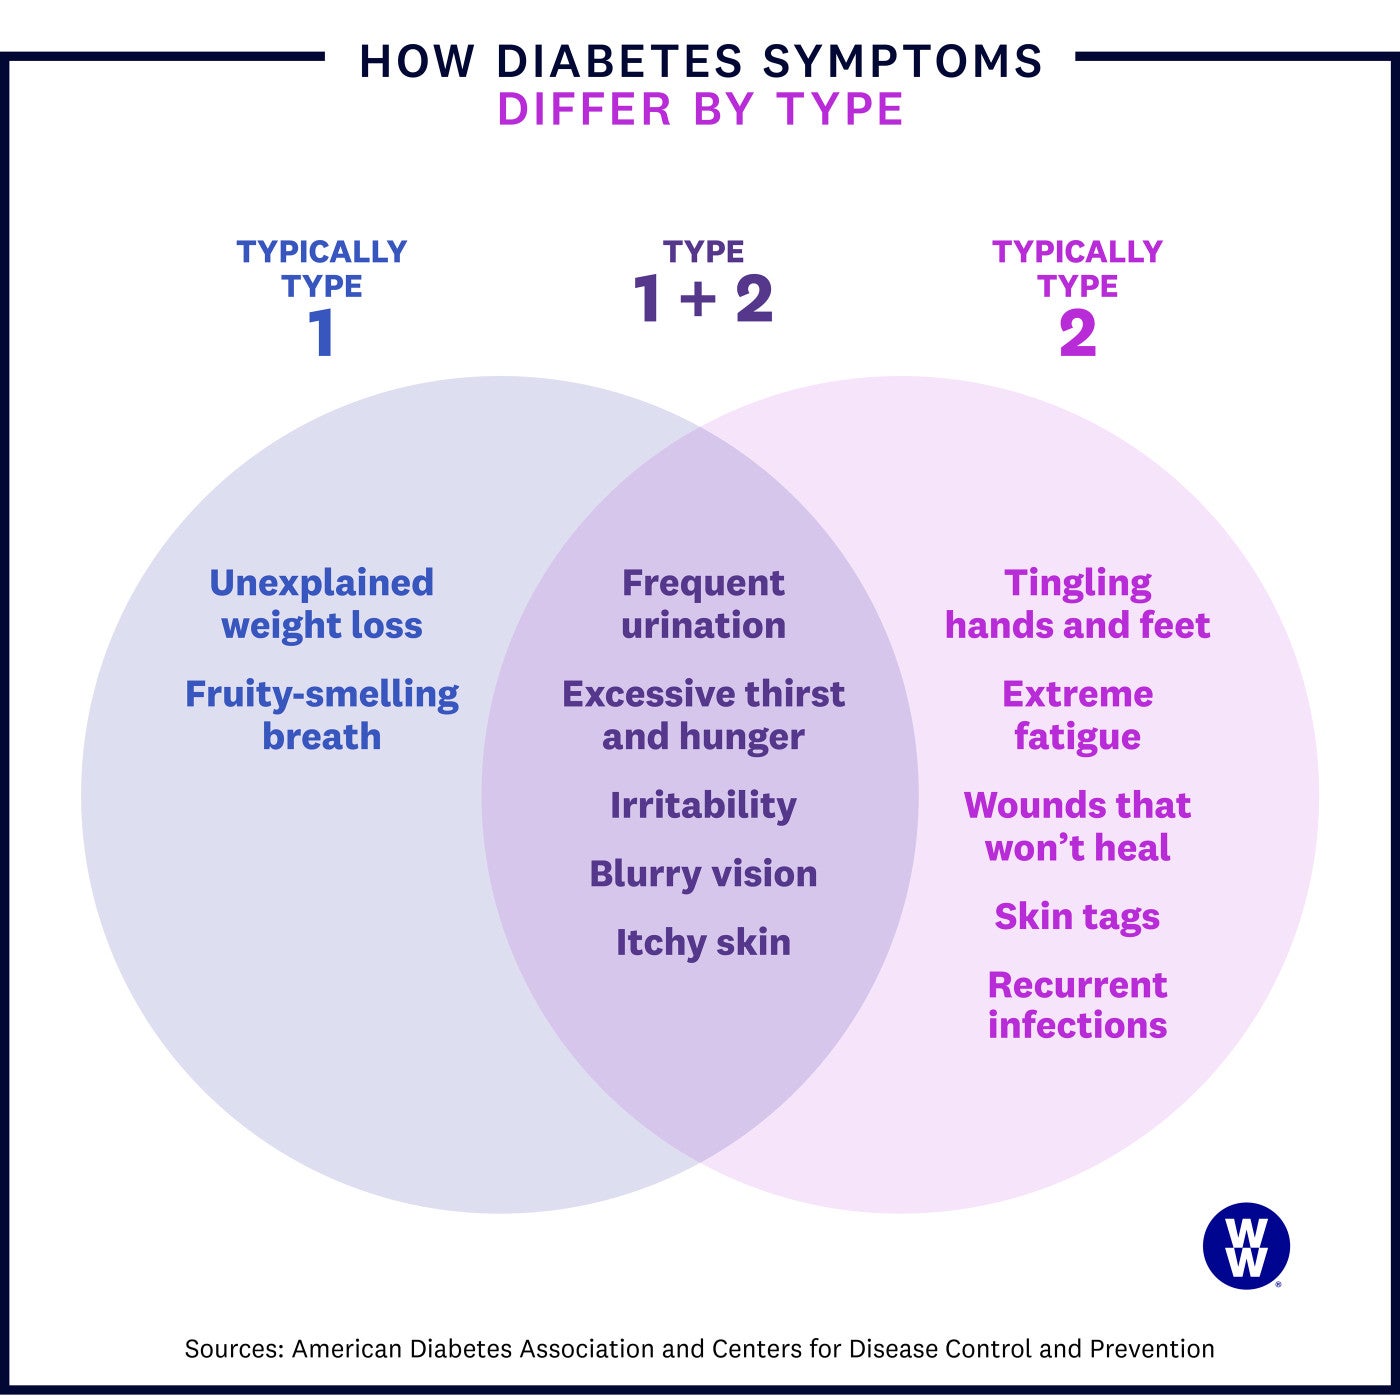 Venn diagram showing how diabetes symptoms may differ between type 1 and type 2.